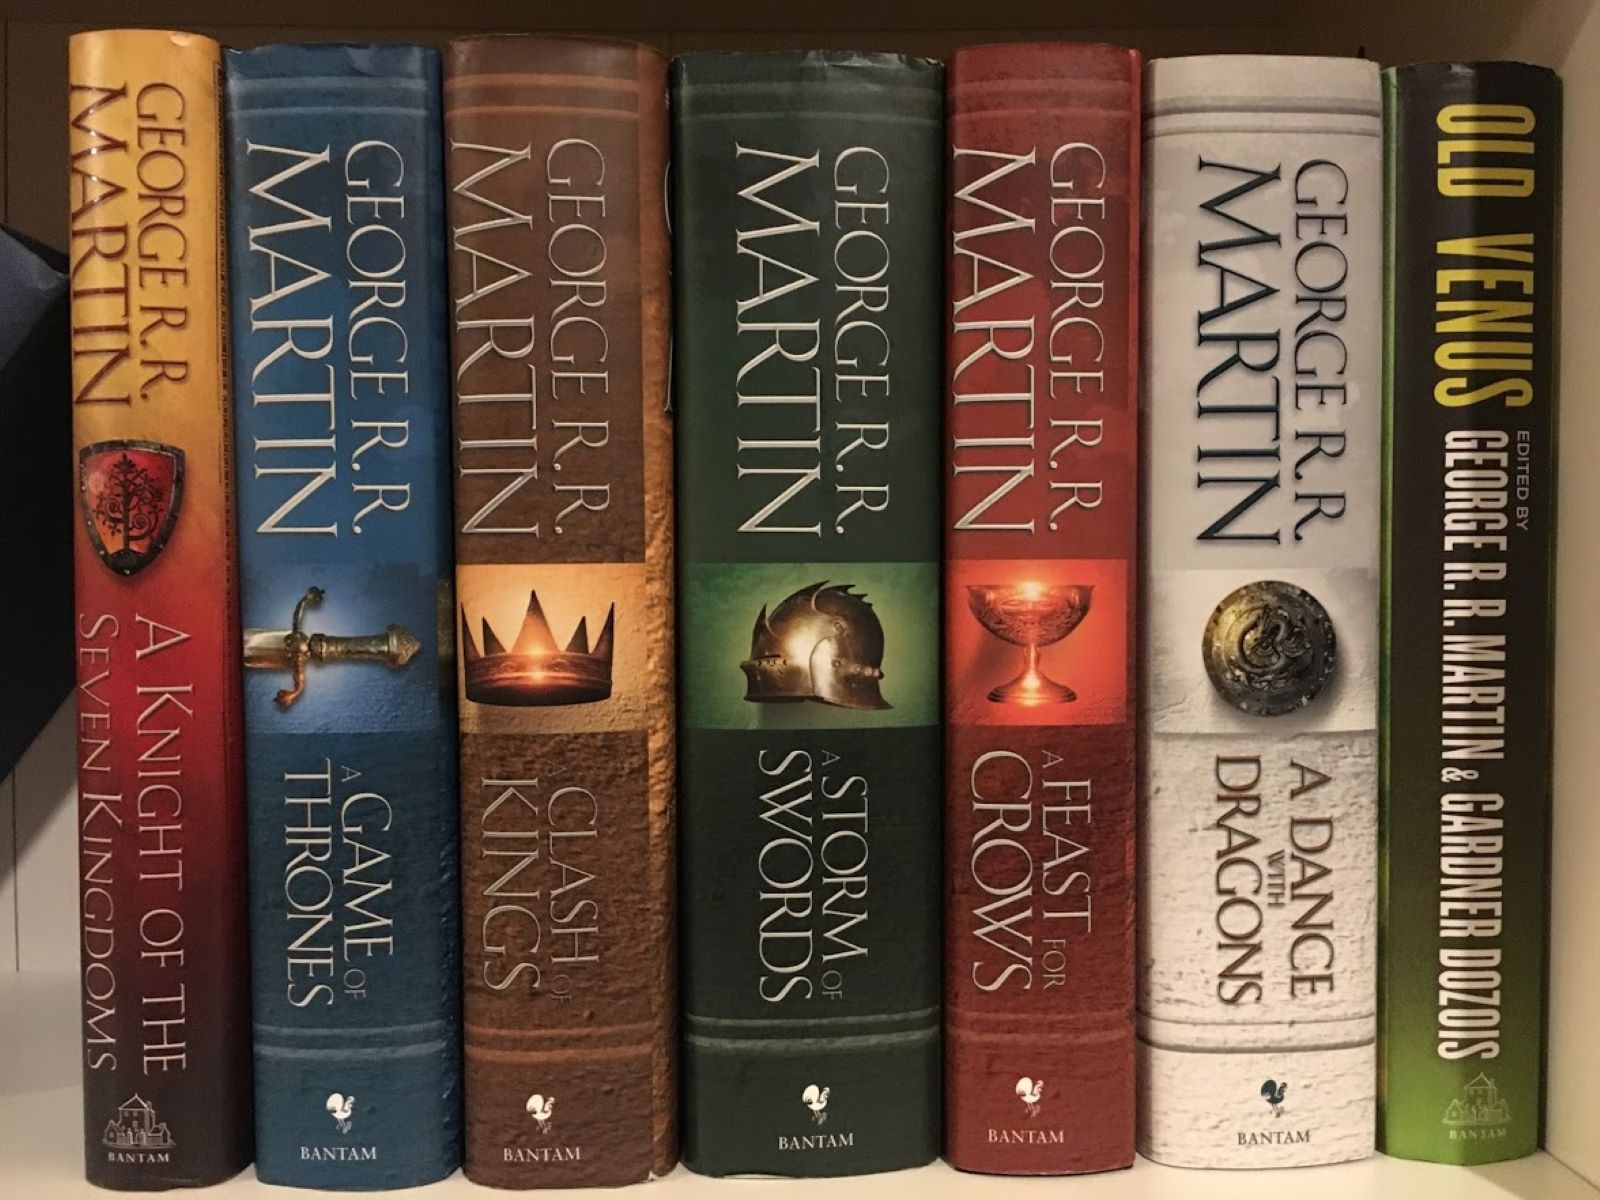 10 Mind-blowing Facts About A Song Of Ice And Fire - George R.R. Martin ...